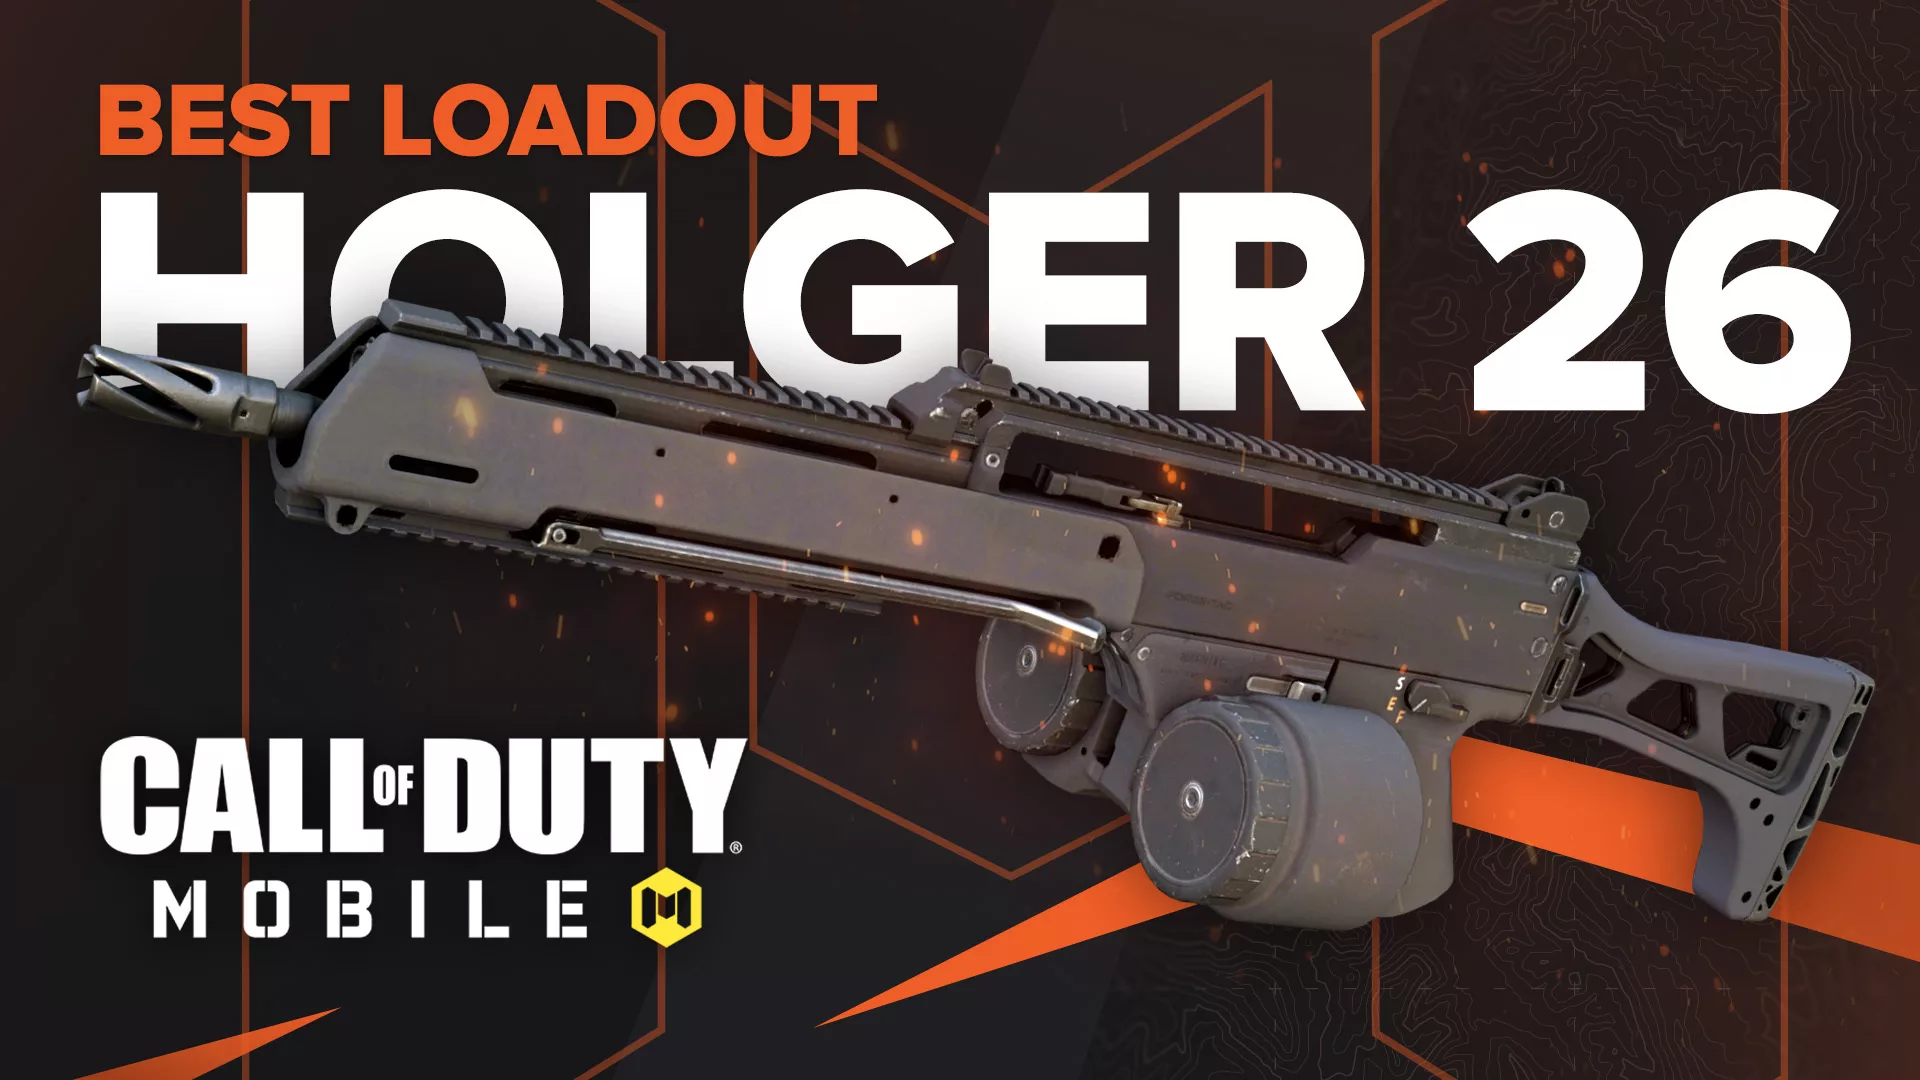 Best Holger-26 Loadout in Call of Duty Mobile